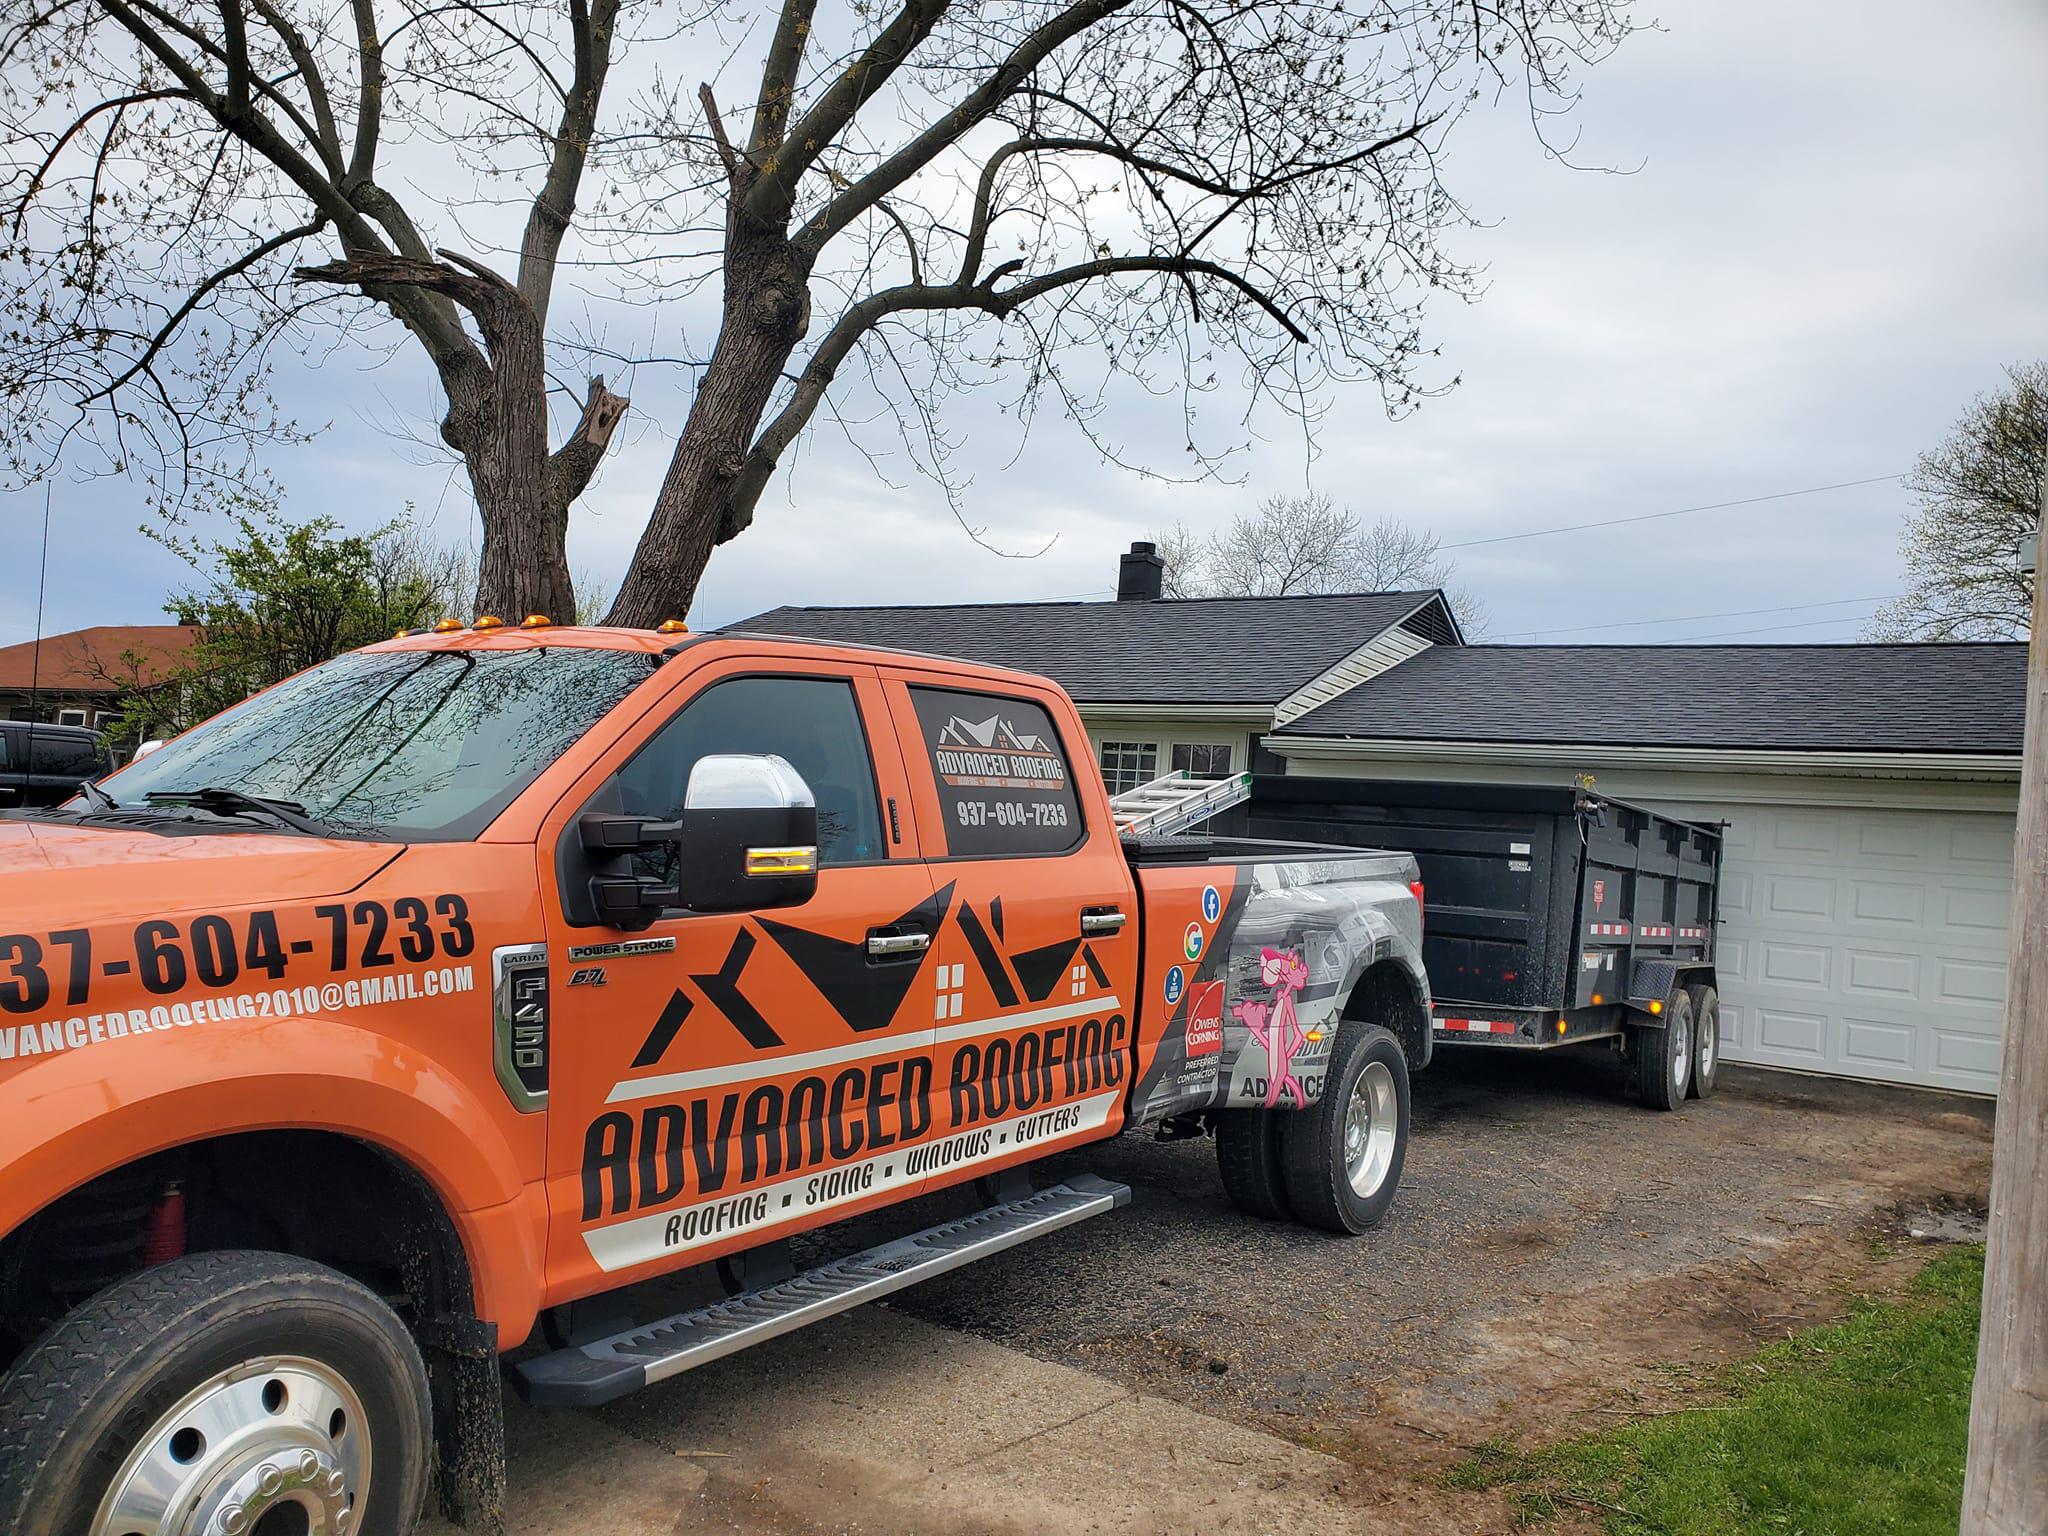 Have a leaky roof? Call us!